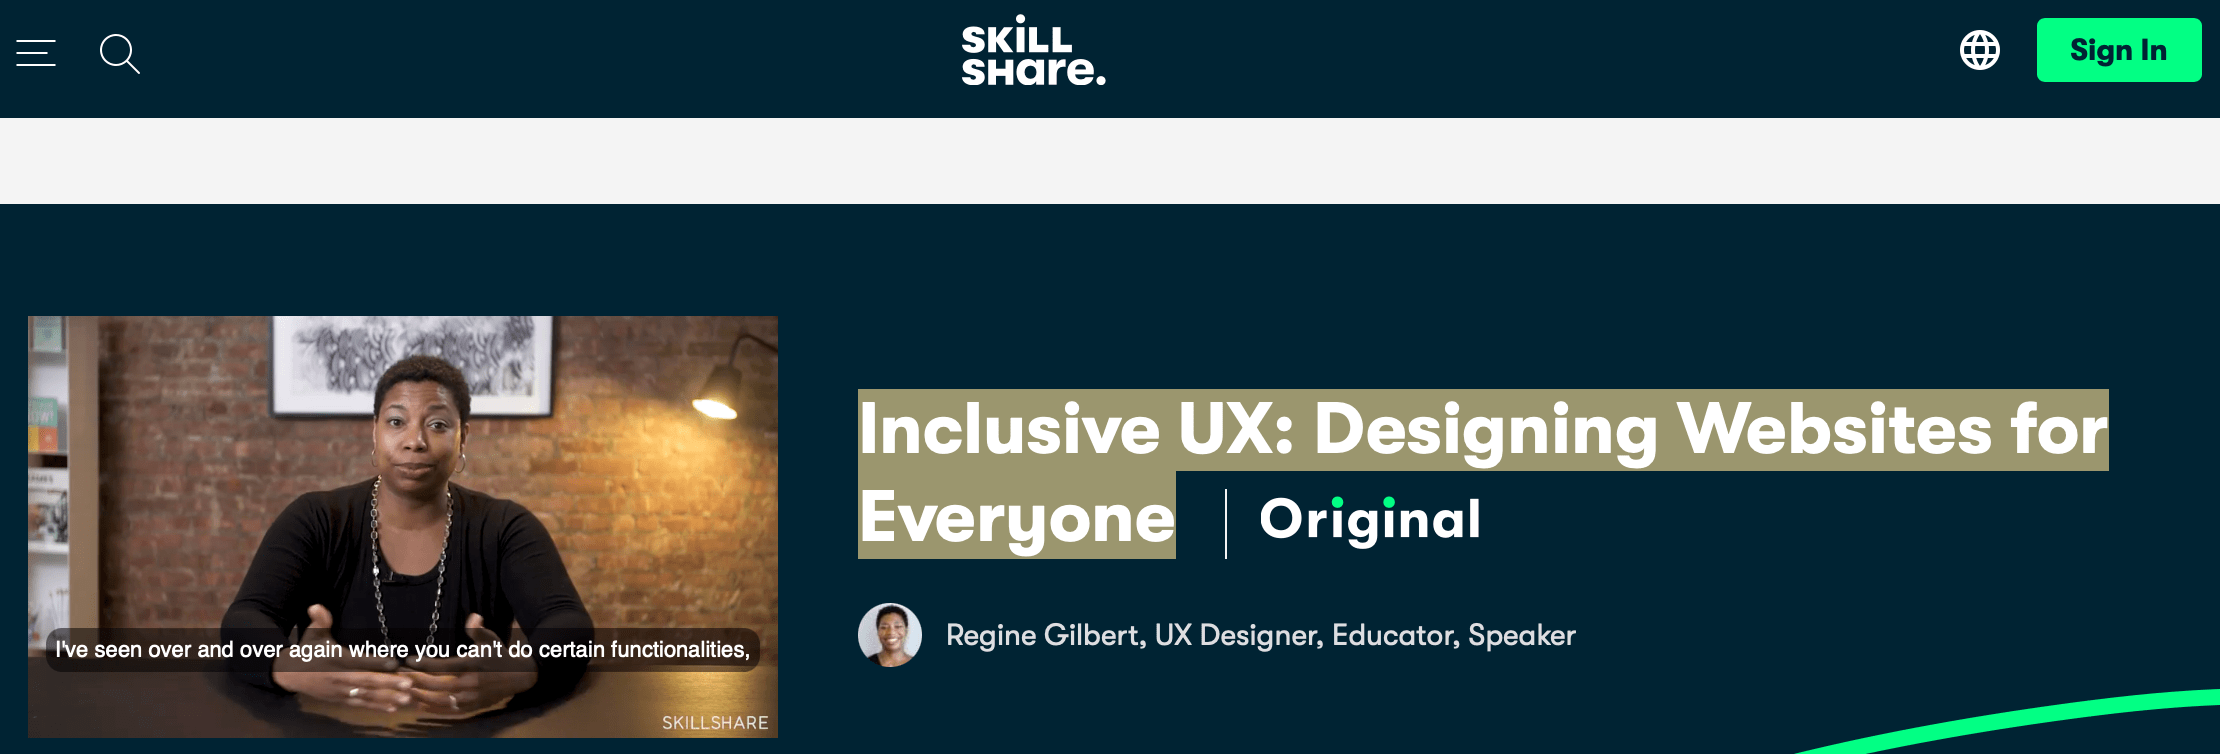 Inclusive UX Designing Websites for Everyone